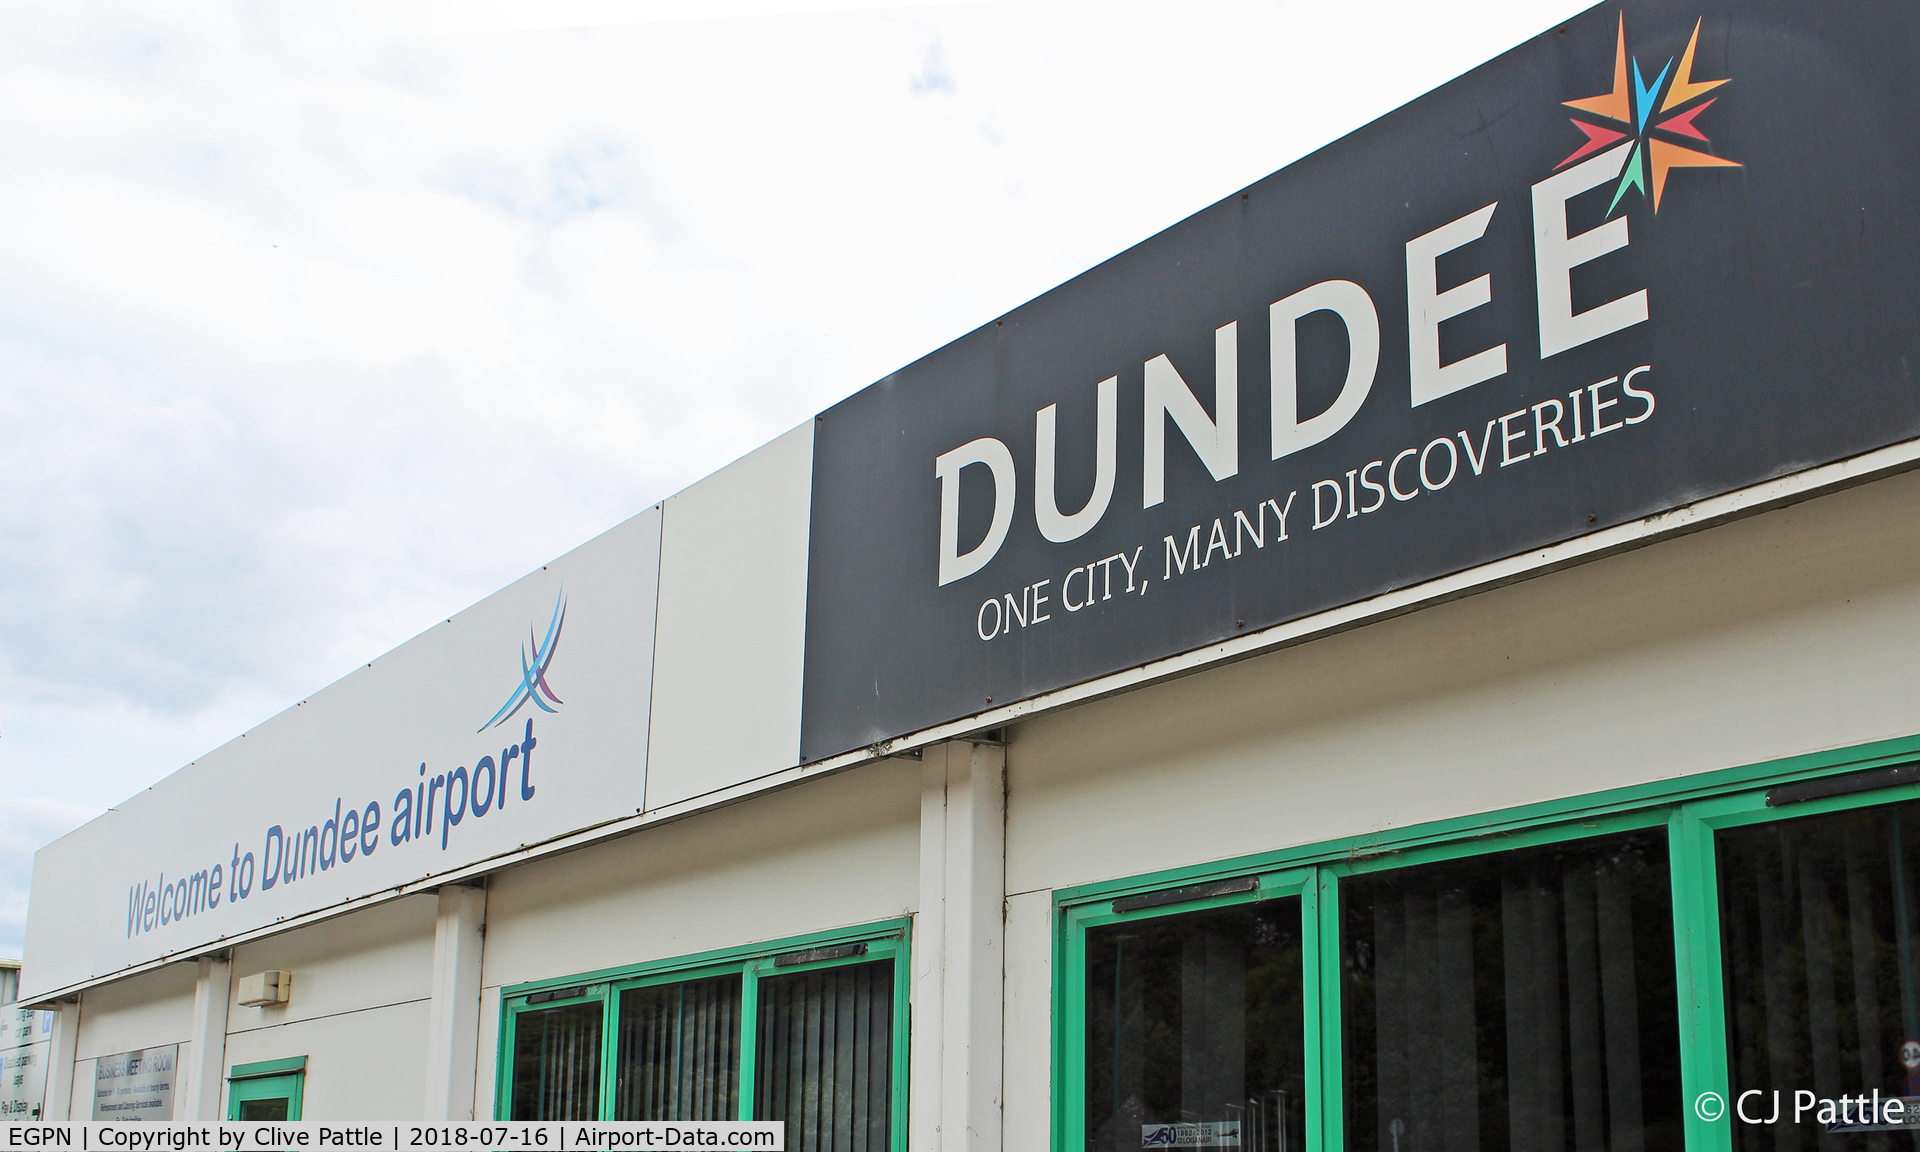 Dundee Airport, Dundee, Scotland United Kingdom (EGPN) - Dundee Airport Terminal signage.